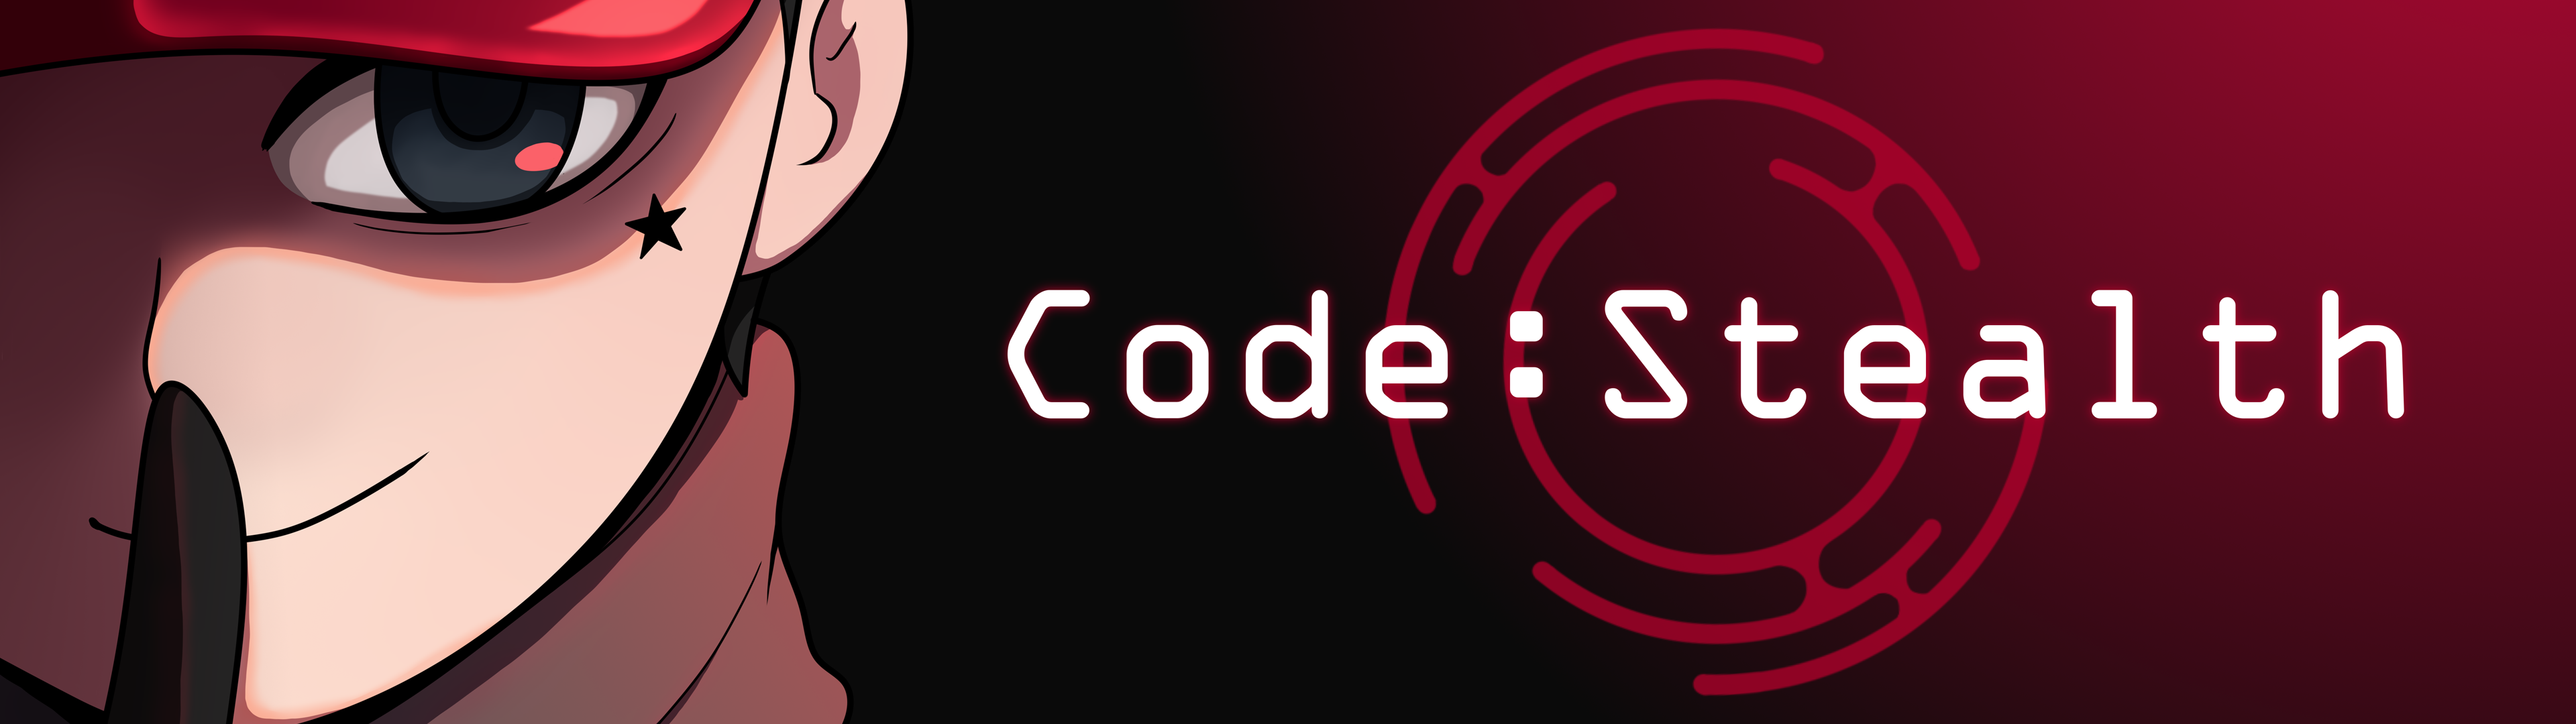 Code:Stealth